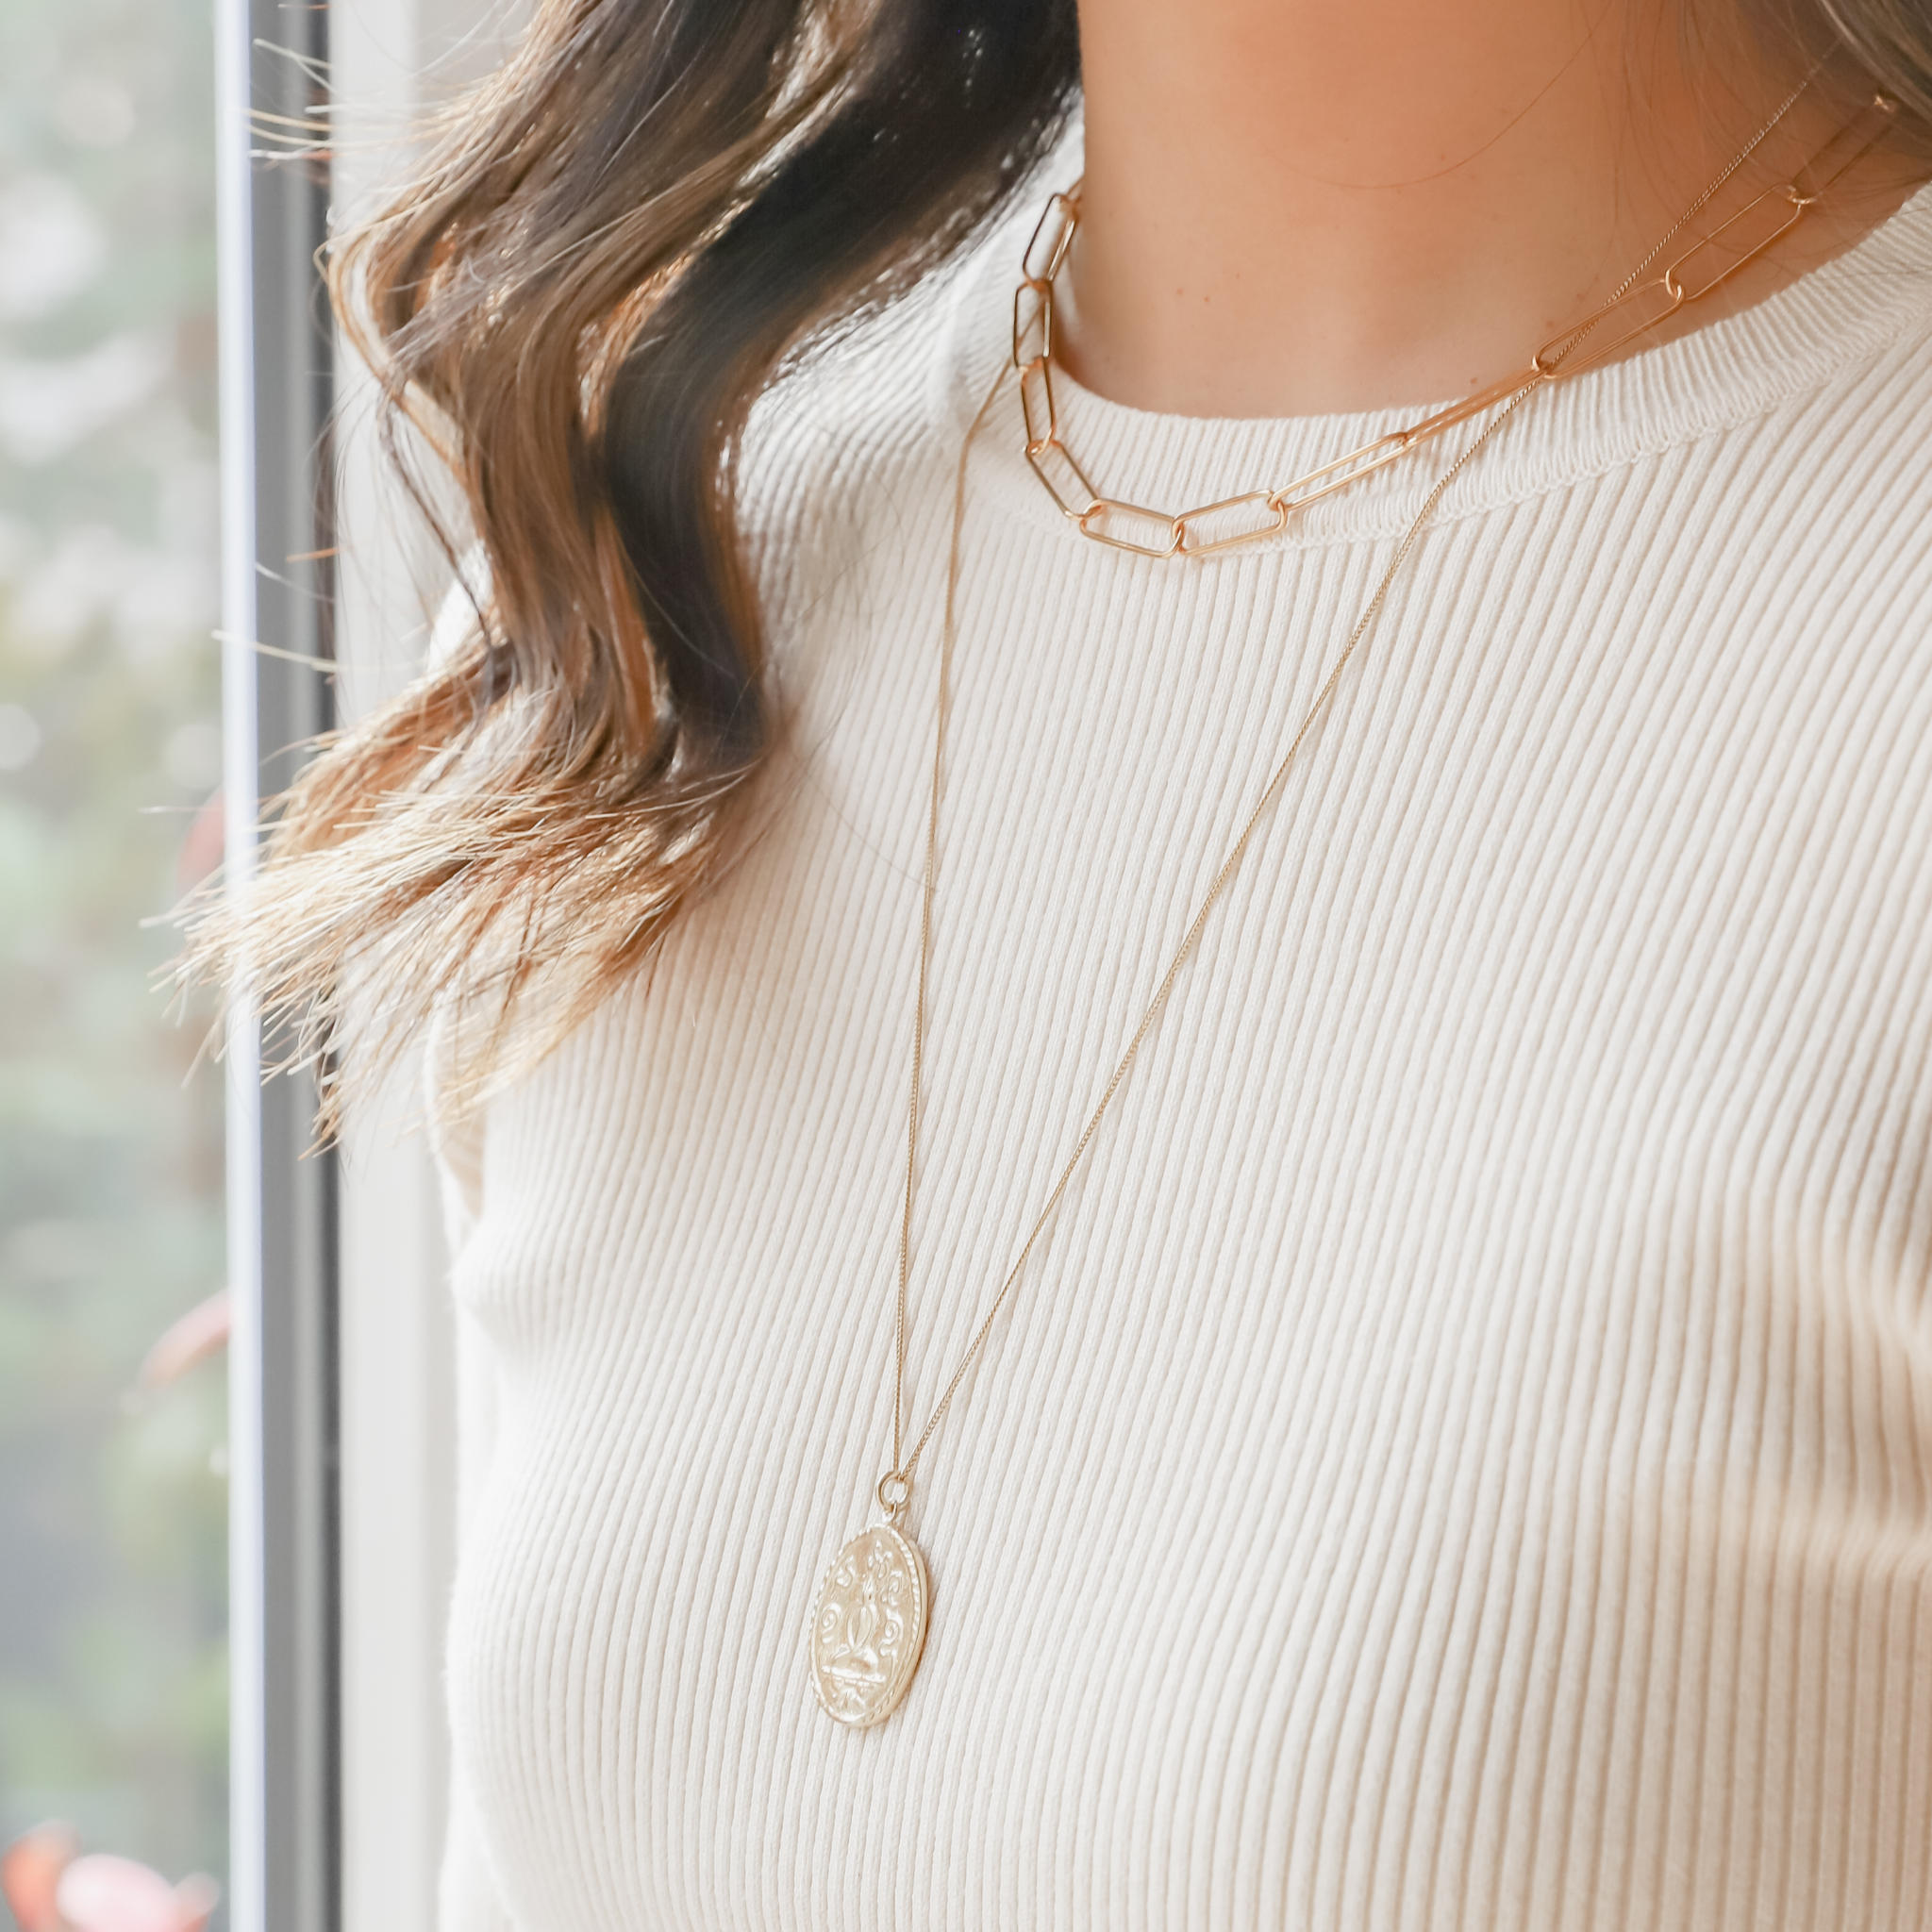 Ladies Layered Chain Necklace 18 Gold Plated Paperclip Chain Silver Tone  Necklace Necklace String Ball